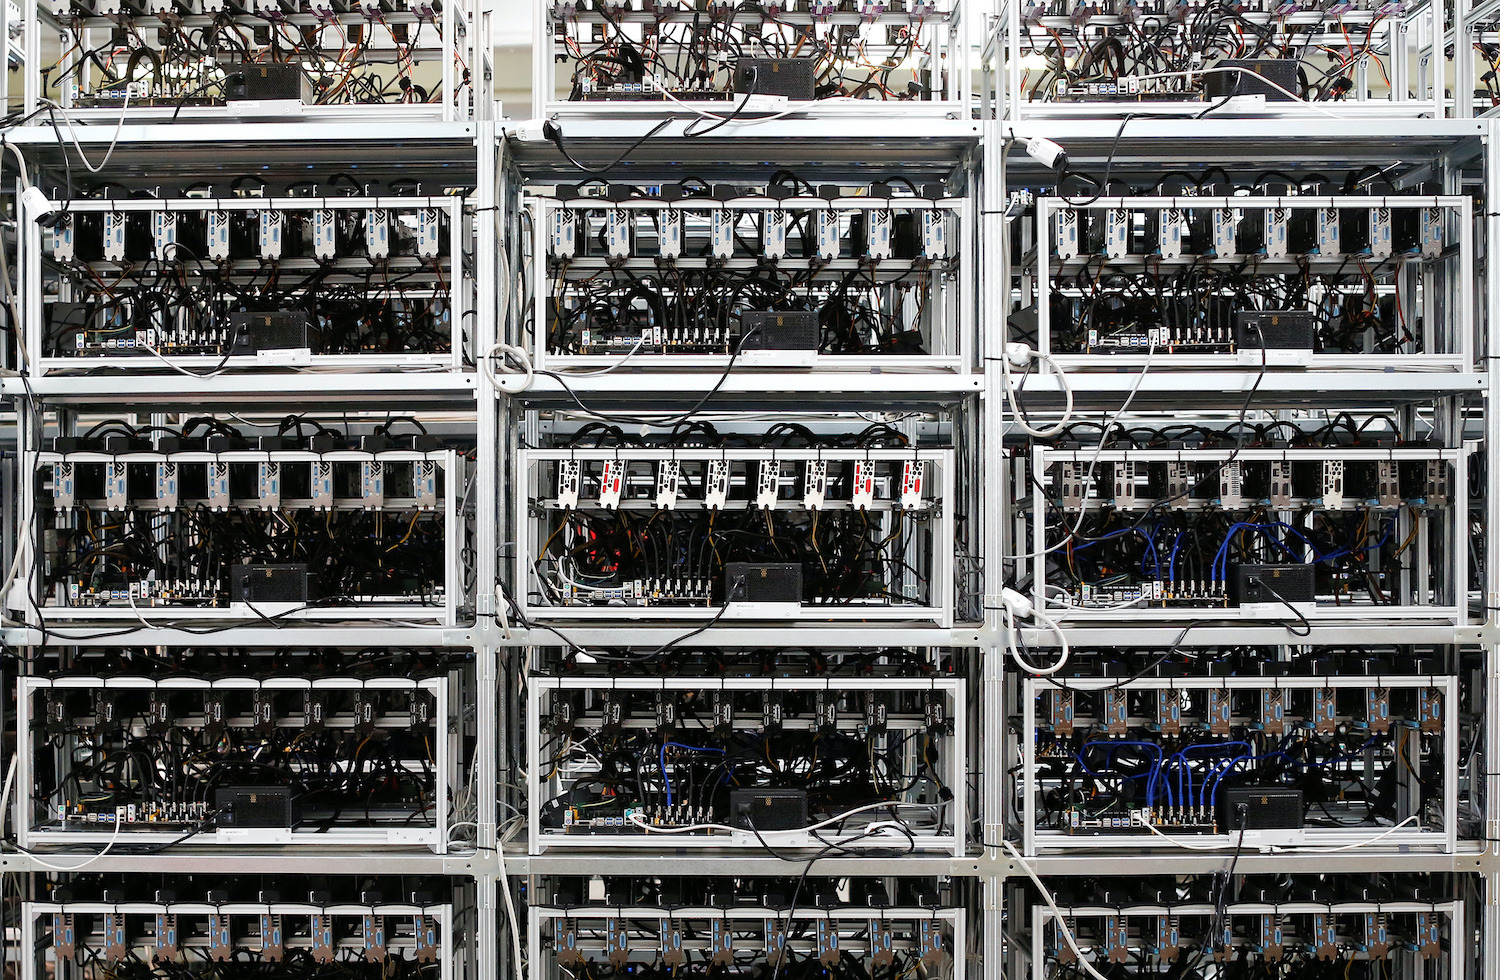 China’s crypto crackdown continues with mining closure orders